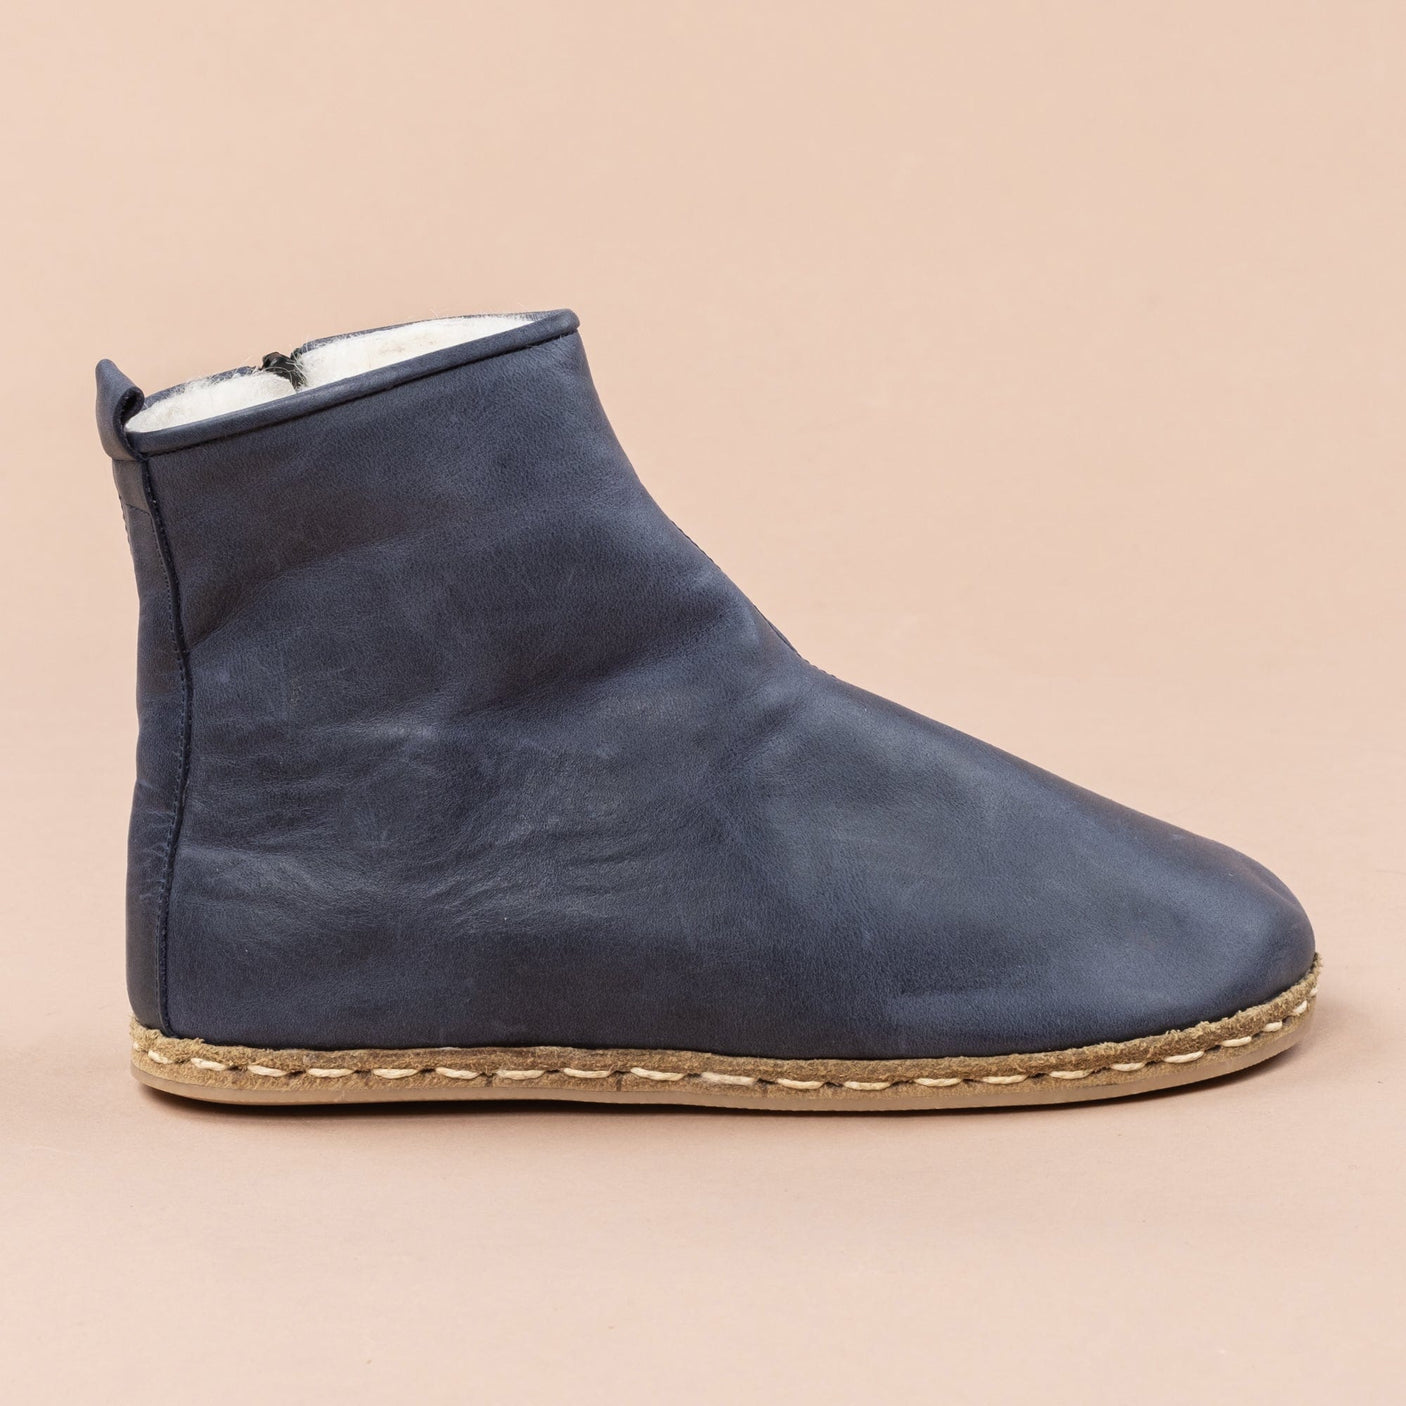 Women's Blue Barefoot Boots with Fur